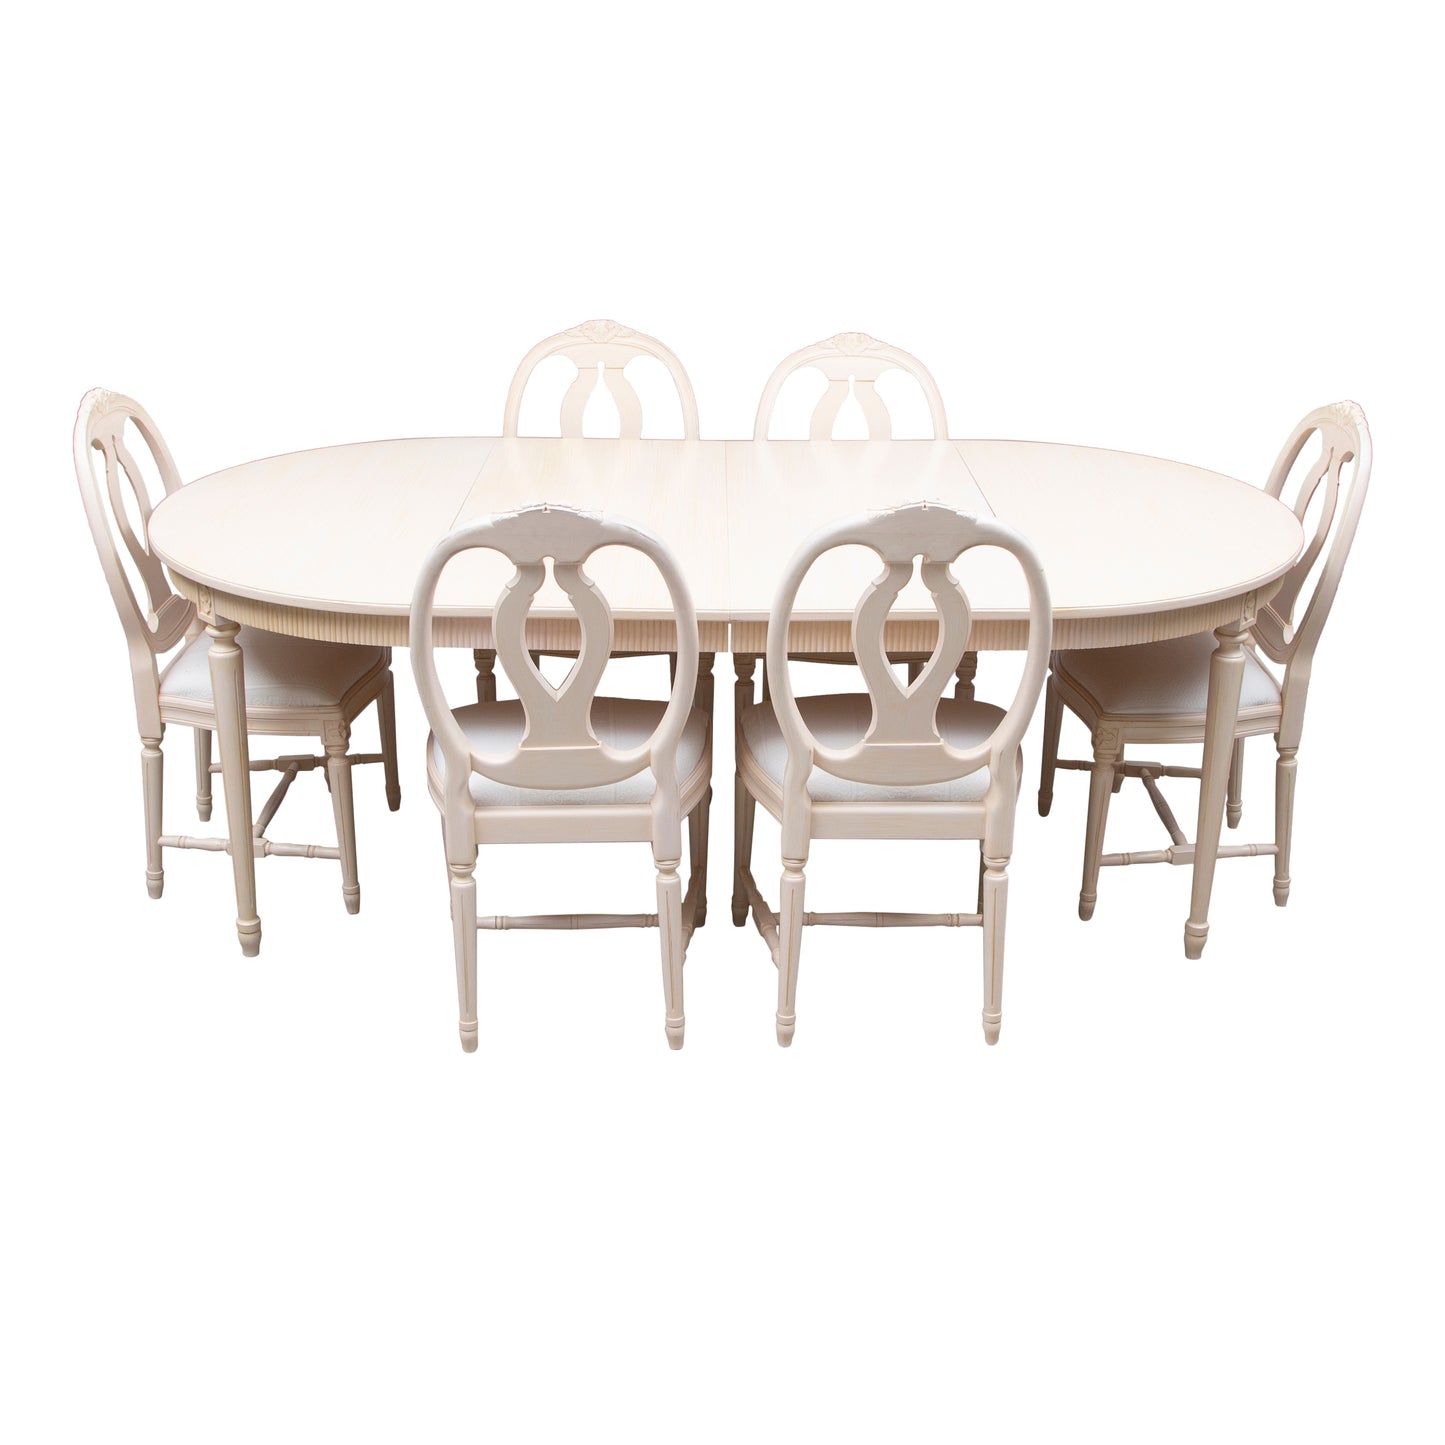 1990s Gustavian Dining Furniture- Set of 6 chairs plus table and leaves